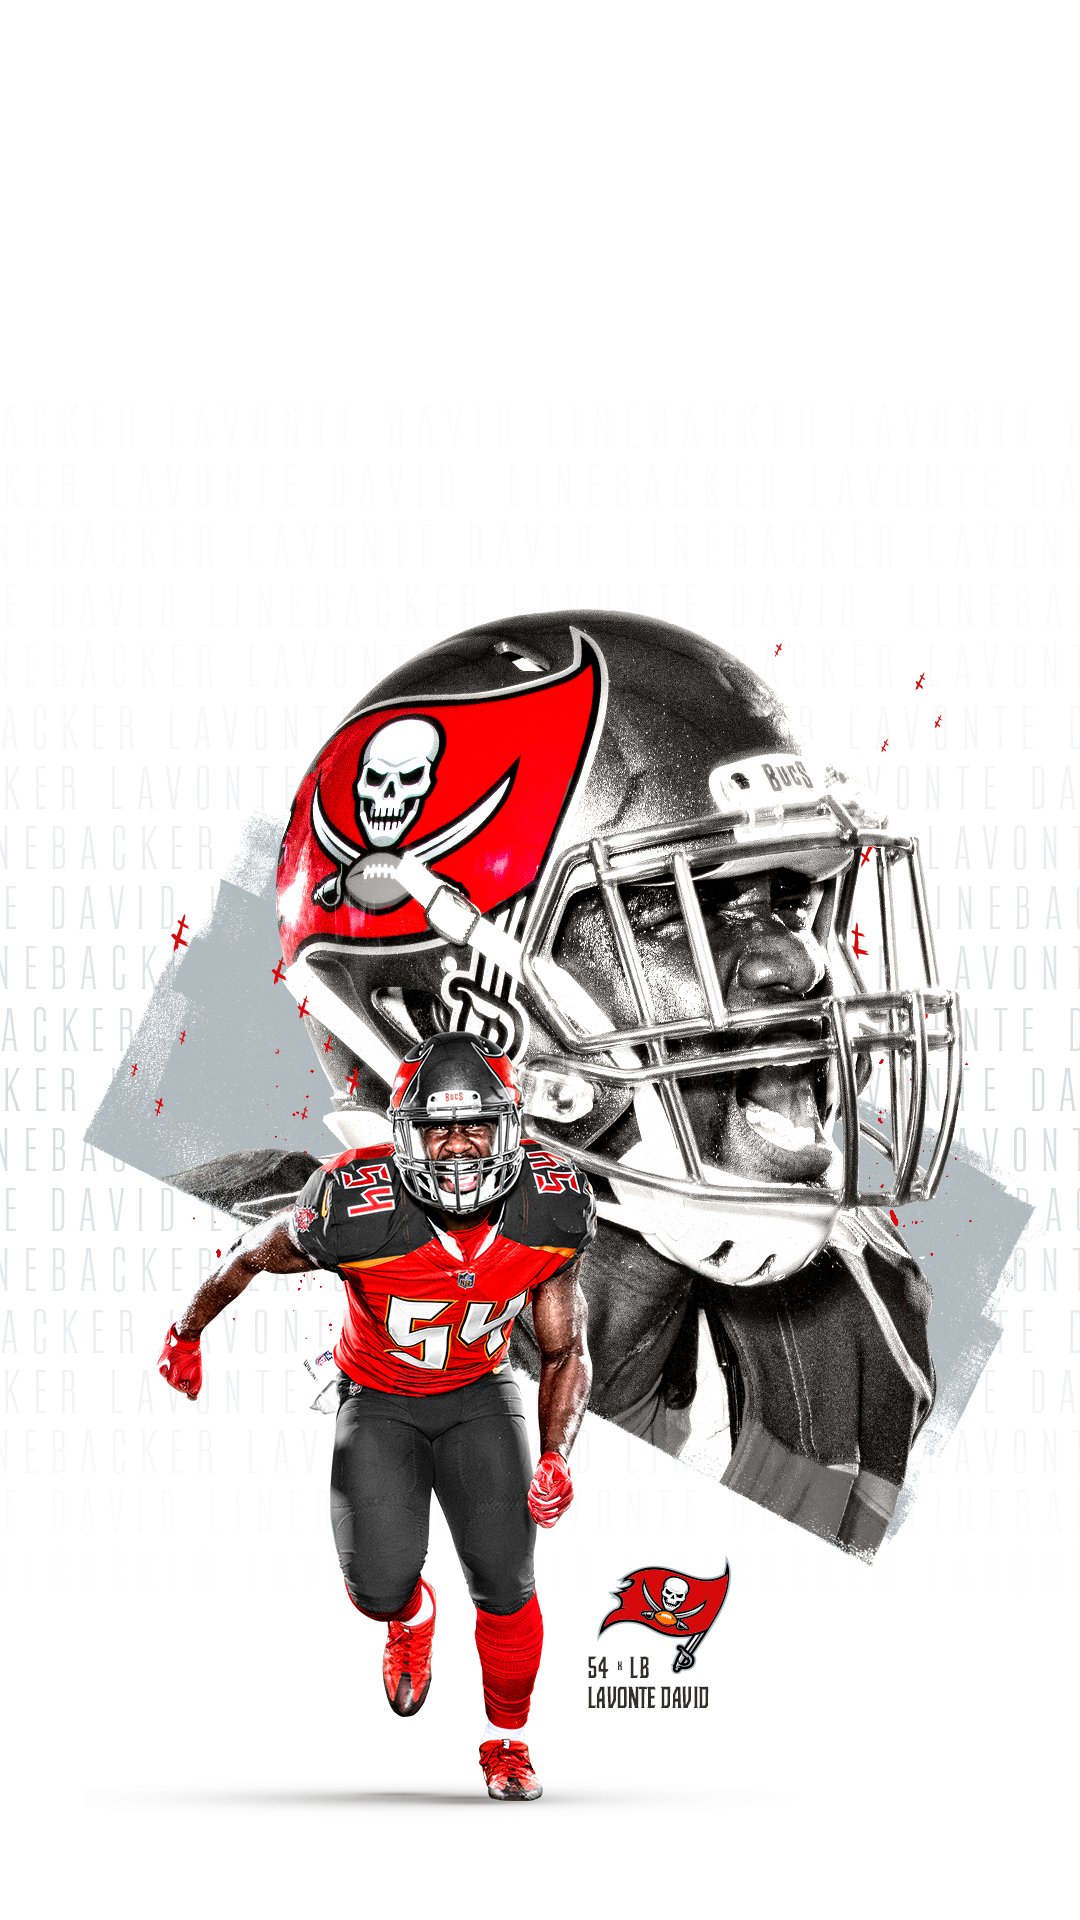 Tampa Bay Buccaneers on X: 'If you don't have @LavonteDavid54 as your  wallpaper, are you even a #Bucs fan? Time to update your 